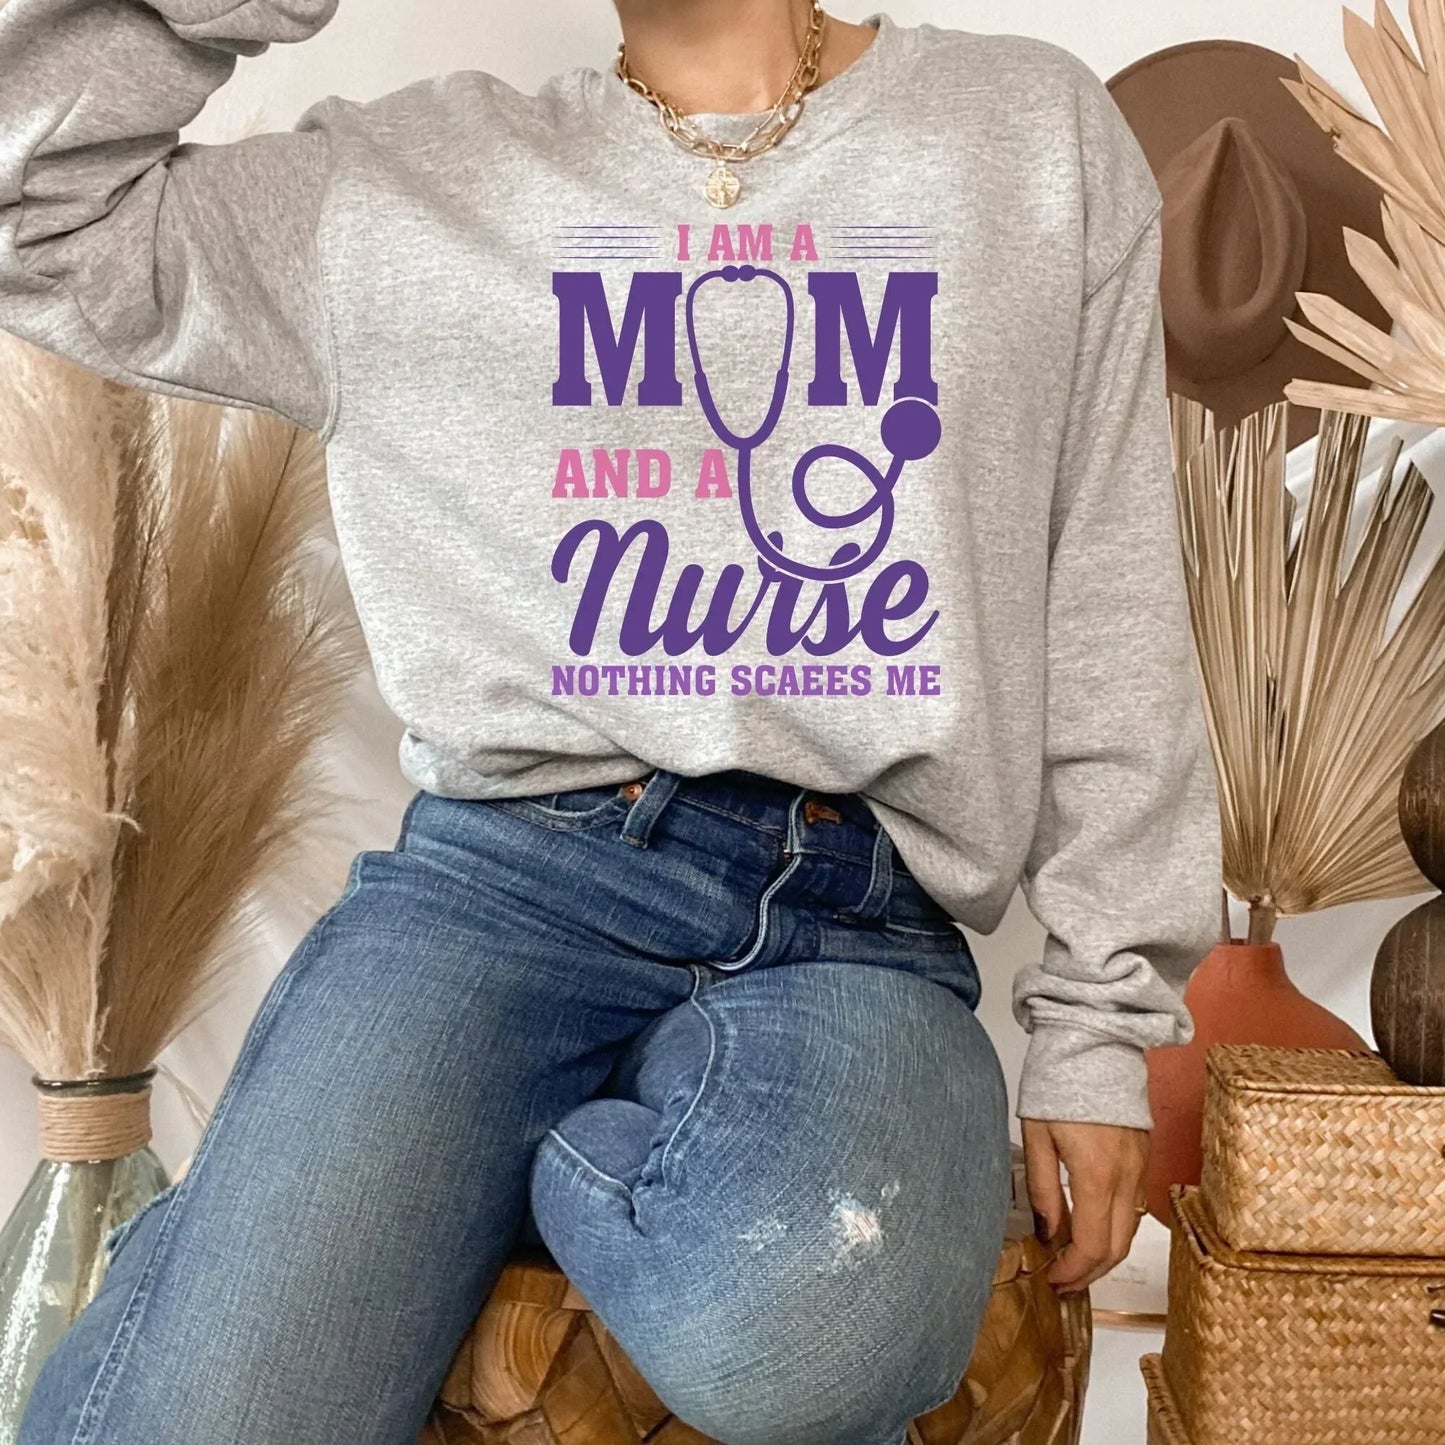 Mom Nurse Shirt, Mother's Day Gift for Mom